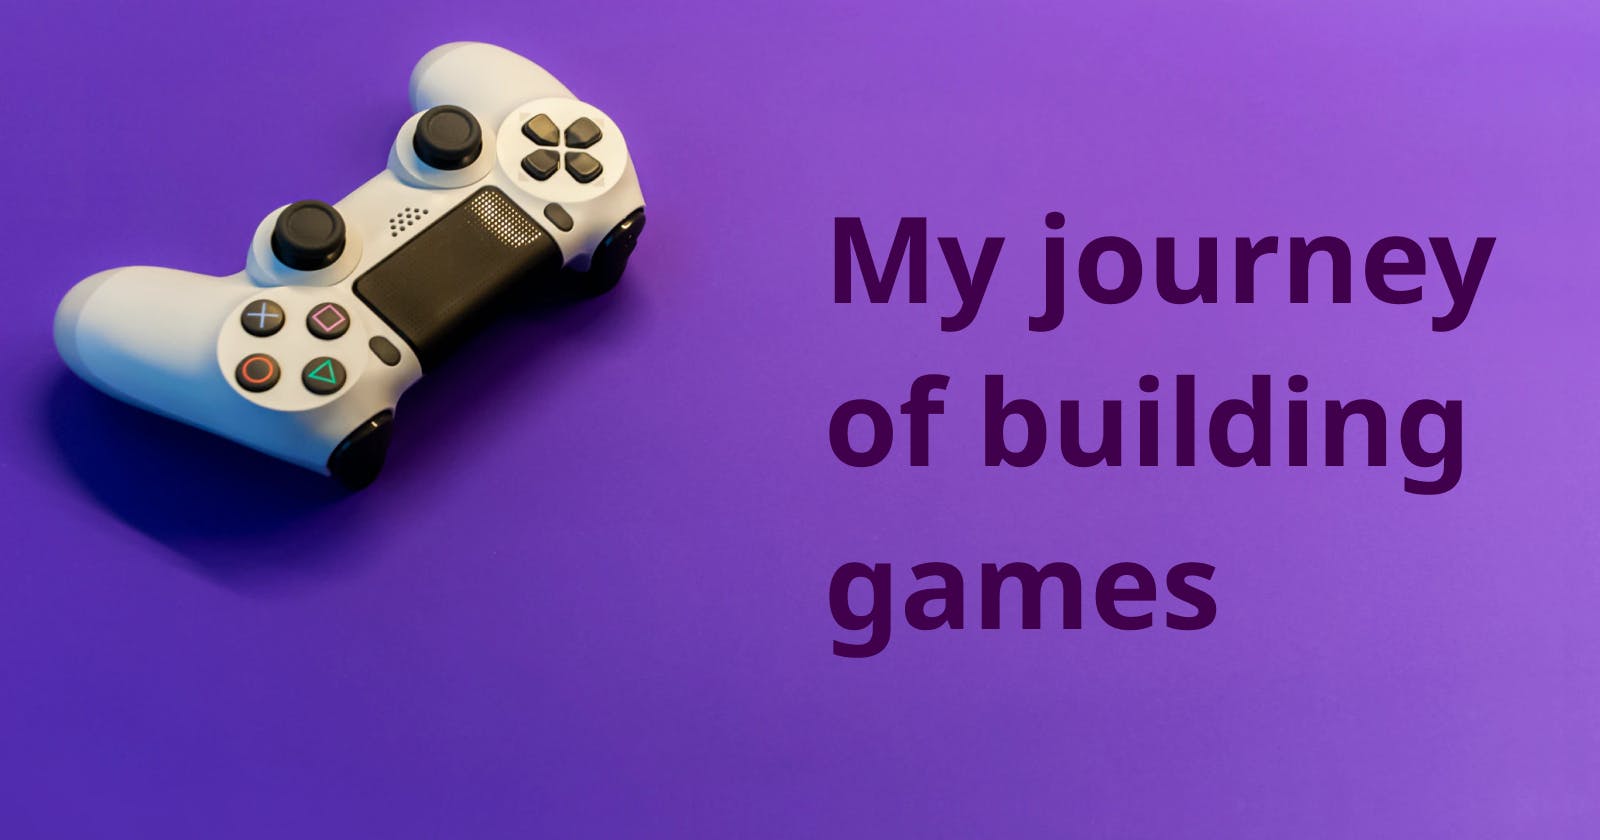 My journey of building games